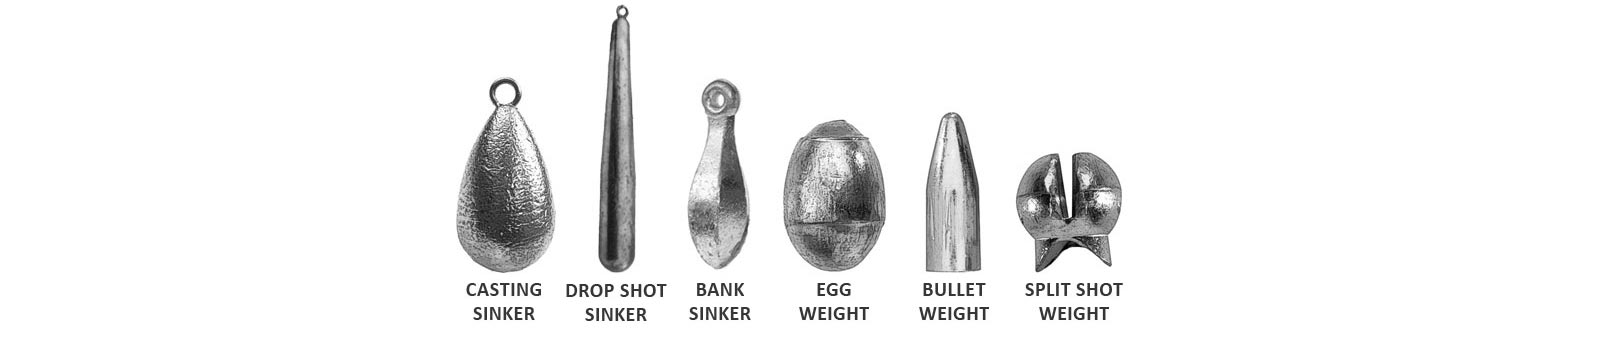 WEIGHTS AND SINKERS